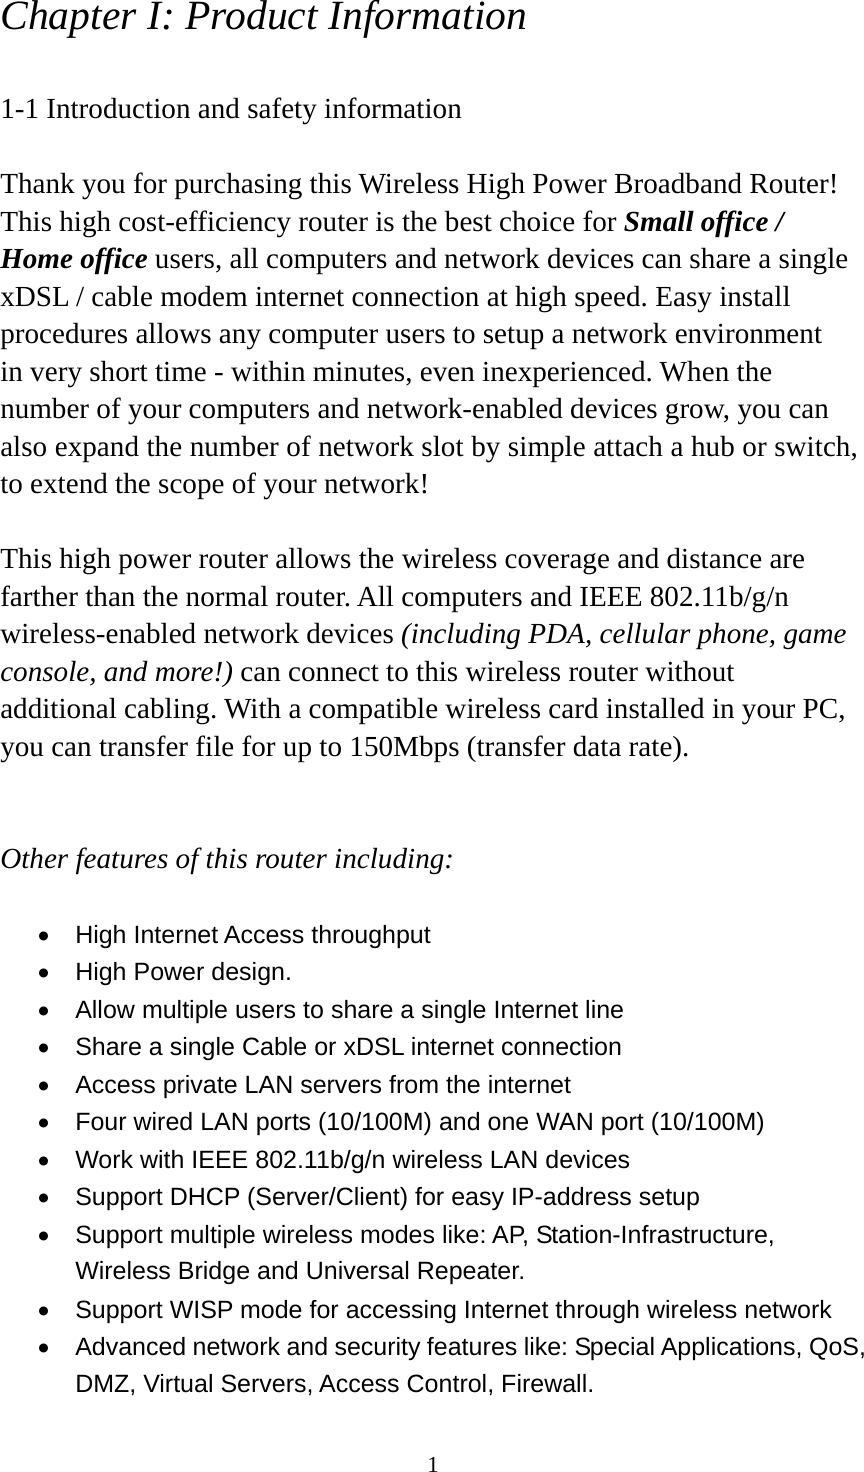 1 Chapter I: Product Information  1-1 Introduction and safety information  Thank you for purchasing this Wireless High Power Broadband Router! This high cost-efficiency router is the best choice for Small office / Home office users, all computers and network devices can share a single xDSL / cable modem internet connection at high speed. Easy install procedures allows any computer users to setup a network environment in very short time - within minutes, even inexperienced. When the number of your computers and network-enabled devices grow, you can also expand the number of network slot by simple attach a hub or switch, to extend the scope of your network!  This high power router allows the wireless coverage and distance are farther than the normal router. All computers and IEEE 802.11b/g/n wireless-enabled network devices (including PDA, cellular phone, game console, and more!) can connect to this wireless router without additional cabling. With a compatible wireless card installed in your PC, you can transfer file for up to 150Mbps (transfer data rate).     Other features of this router including:  •  High Internet Access throughput   •  High Power design. •  Allow multiple users to share a single Internet line   •  Share a single Cable or xDSL internet connection •  Access private LAN servers from the internet •  Four wired LAN ports (10/100M) and one WAN port (10/100M) •  Work with IEEE 802.11b/g/n wireless LAN devices •  Support DHCP (Server/Client) for easy IP-address setup   •  Support multiple wireless modes like: AP, Station-Infrastructure, Wireless Bridge and Universal Repeater. •  Support WISP mode for accessing Internet through wireless network •  Advanced network and security features like: Special Applications, QoS, DMZ, Virtual Servers, Access Control, Firewall. 